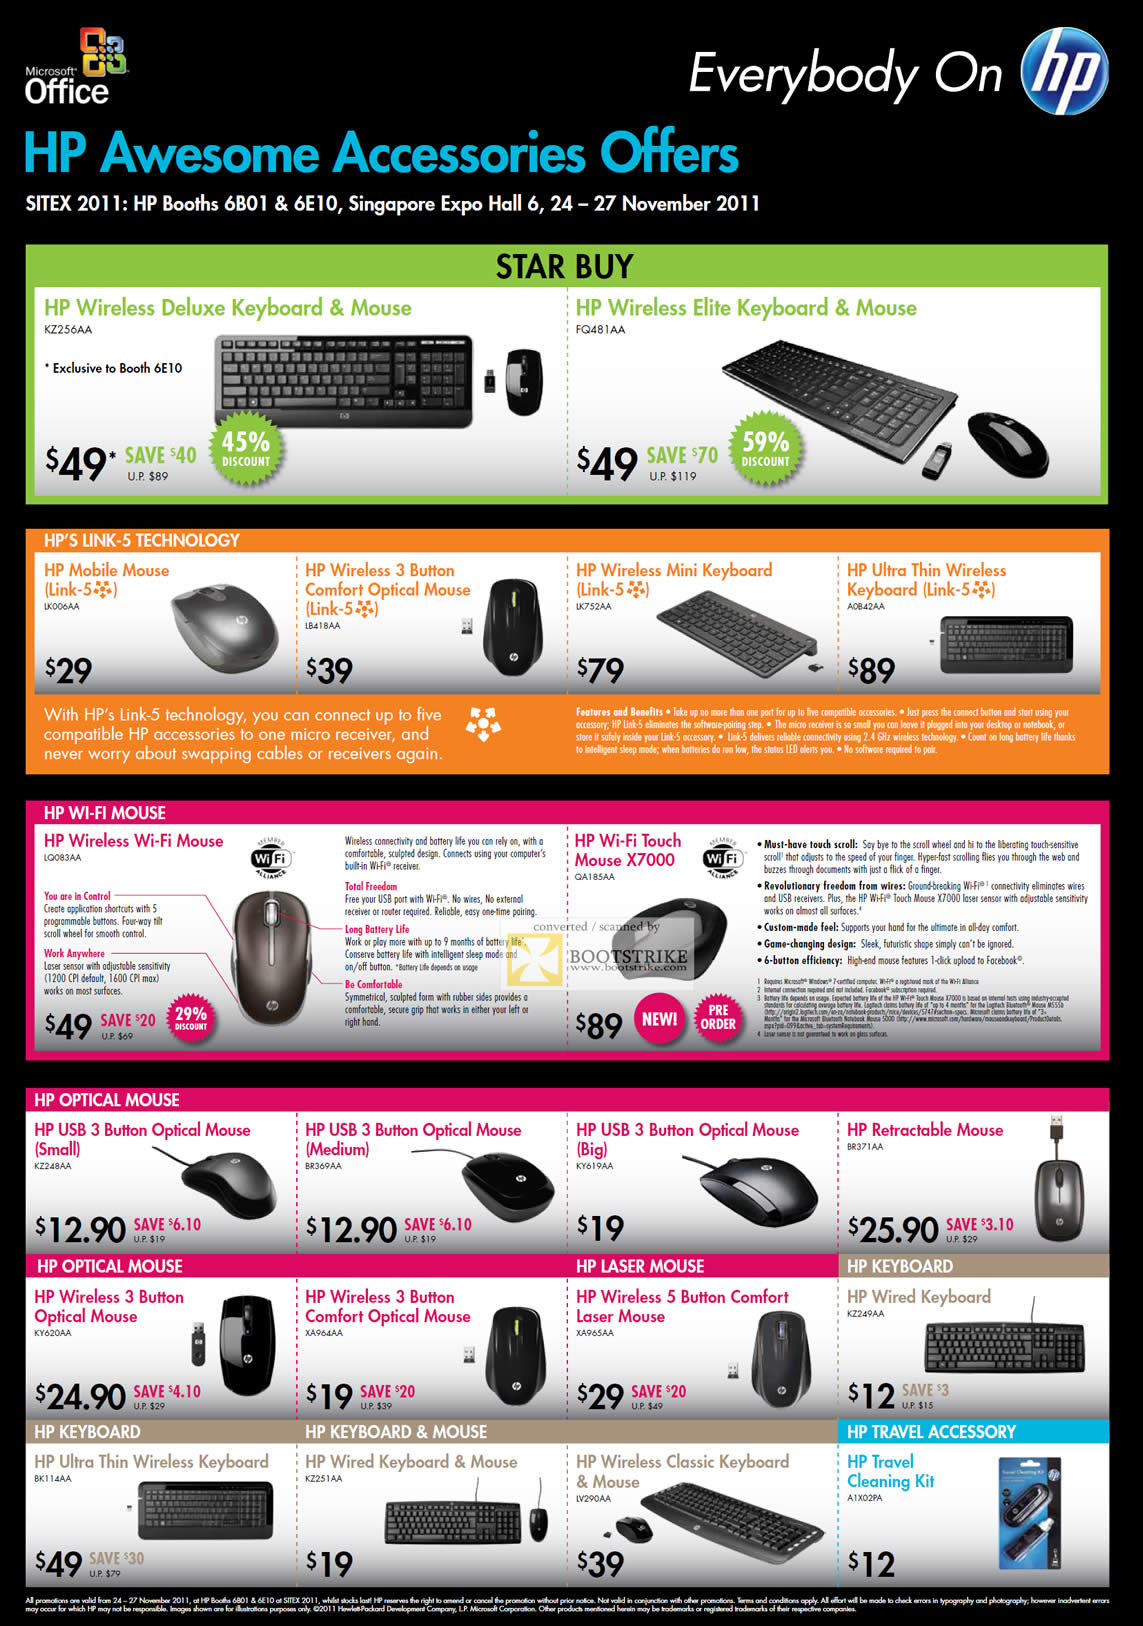 SITEX 2011 price list image brochure of HP Accessories Wireless Keyboard, Elite, Mouse, Link-5 Technology, Optical, Ultra Thin Keyboard, Wireless Wi-Fi Mouse, Wi-Fi Touch Mouse X7000, USB, Wired, Travel Accessory Cleaning Kit